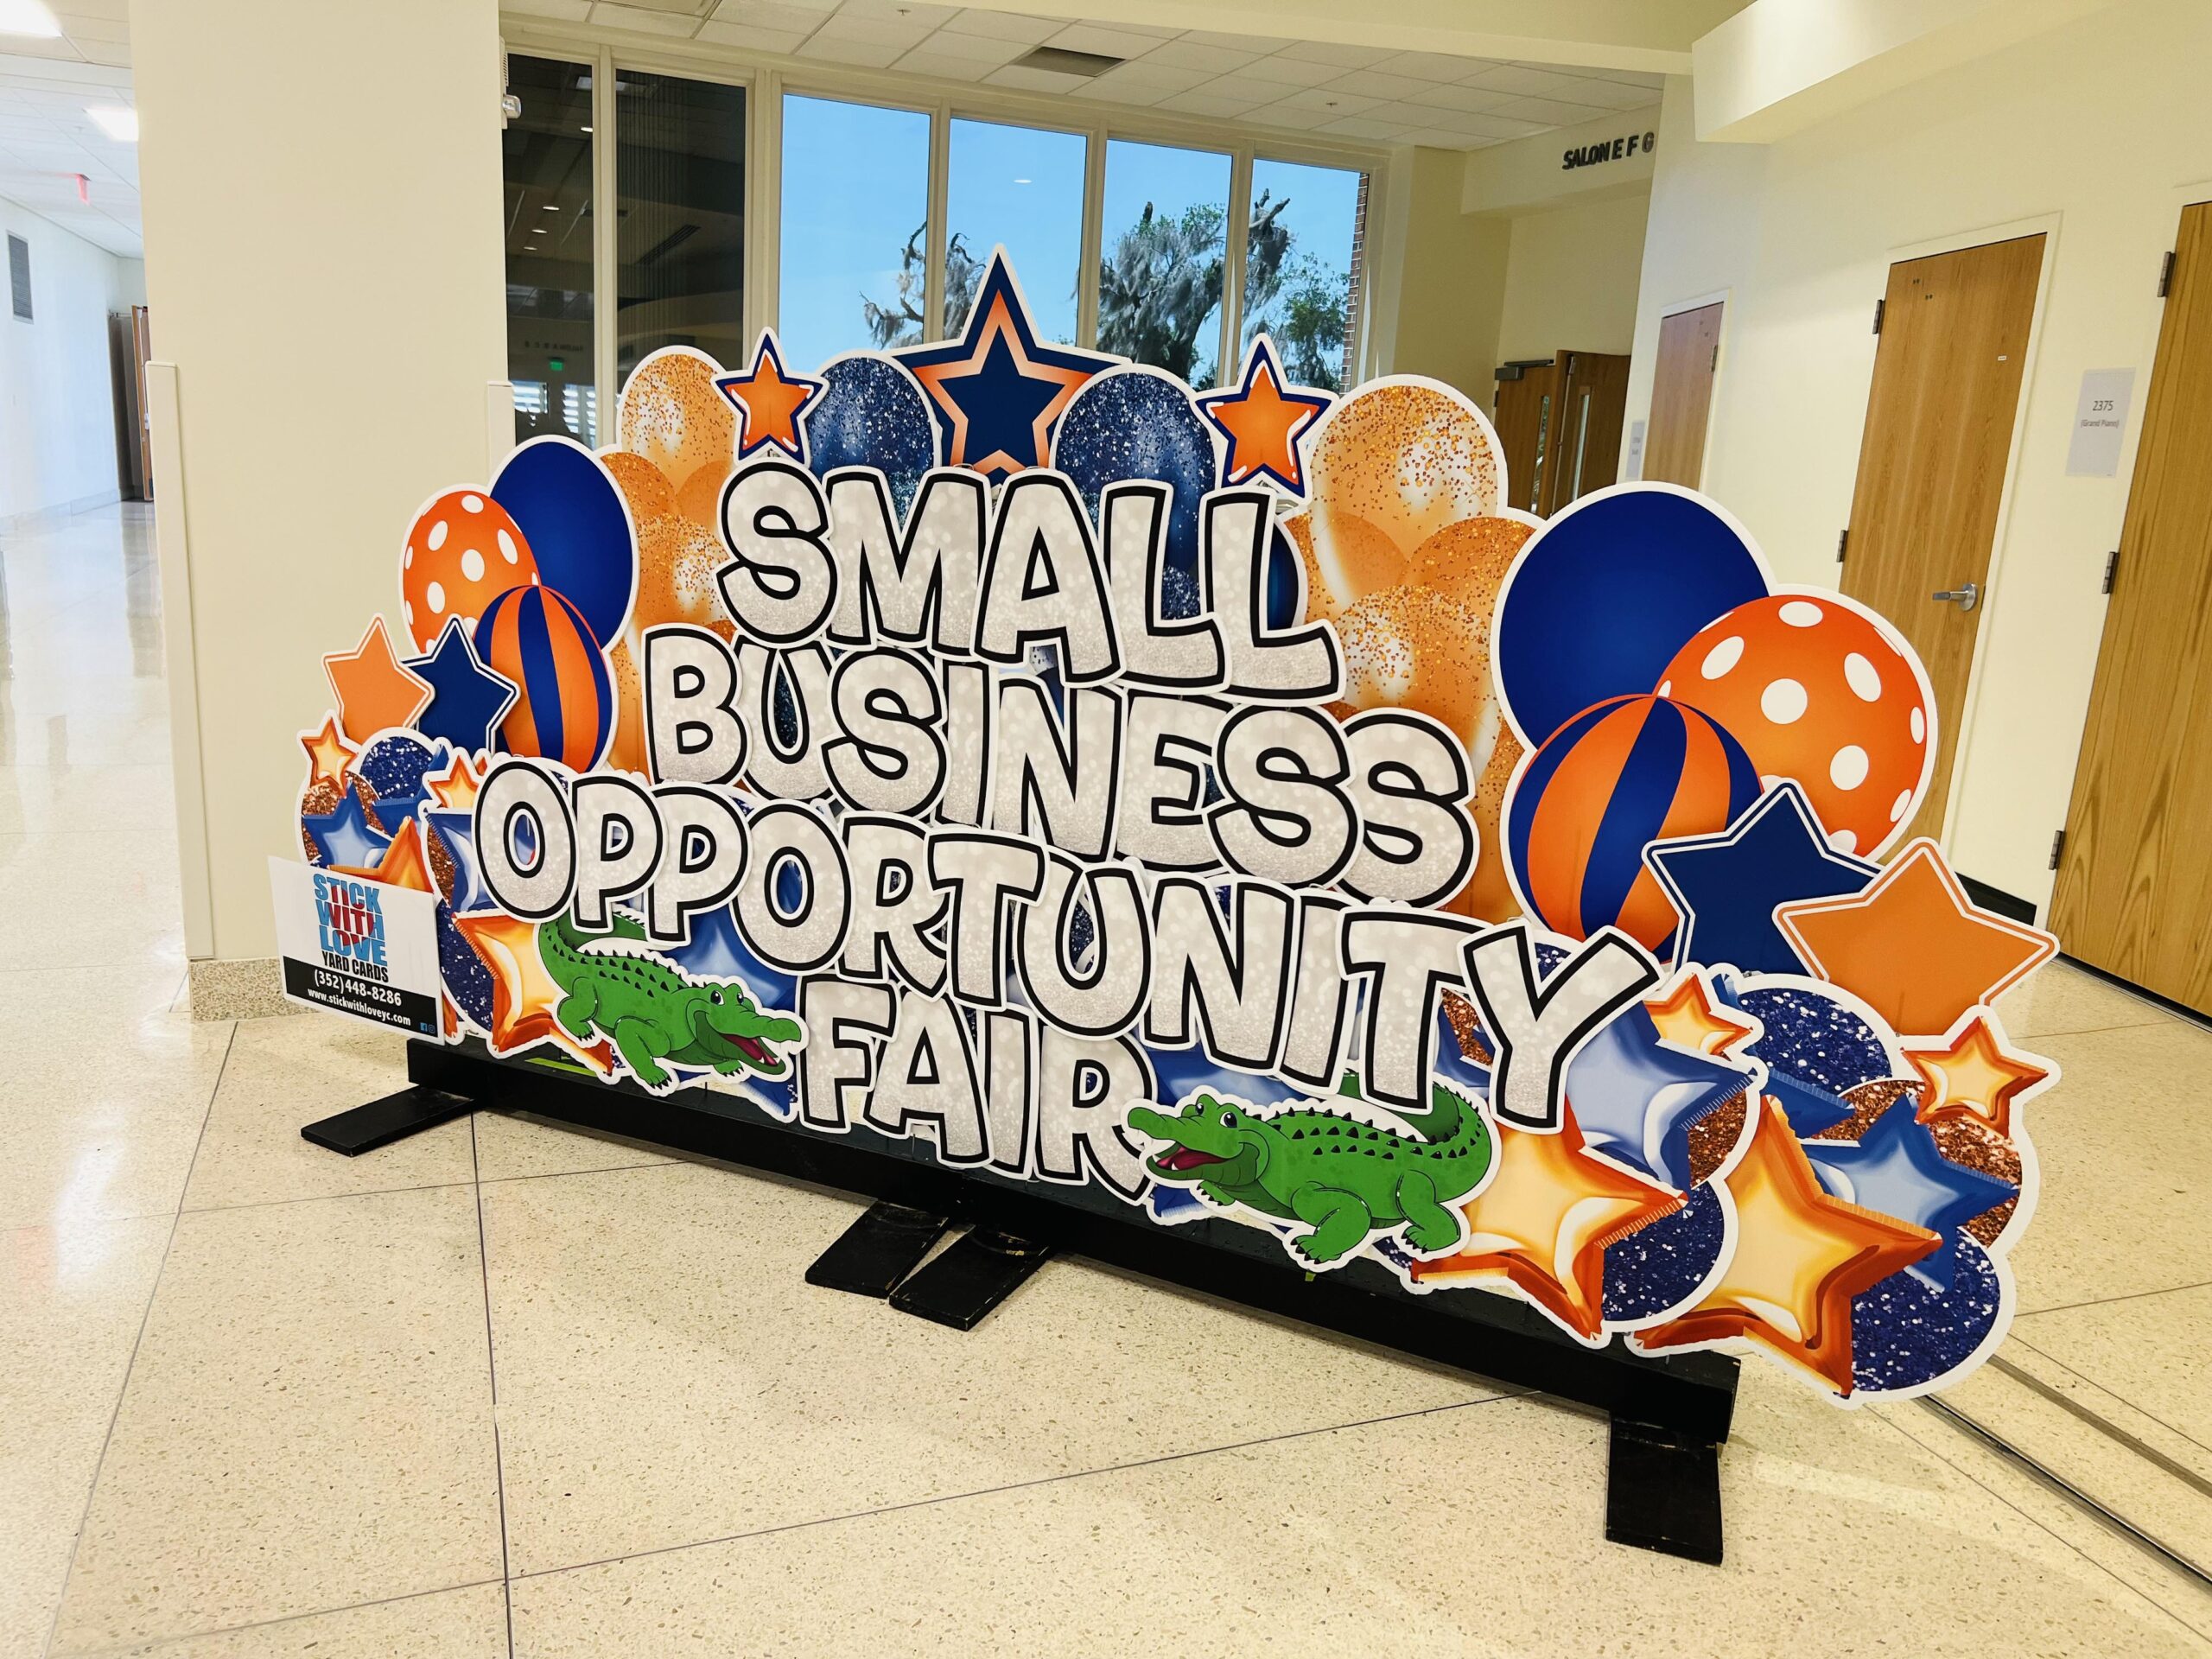 Business Owners attend Small Business Opportunity Fair after 4-Year Hiatus